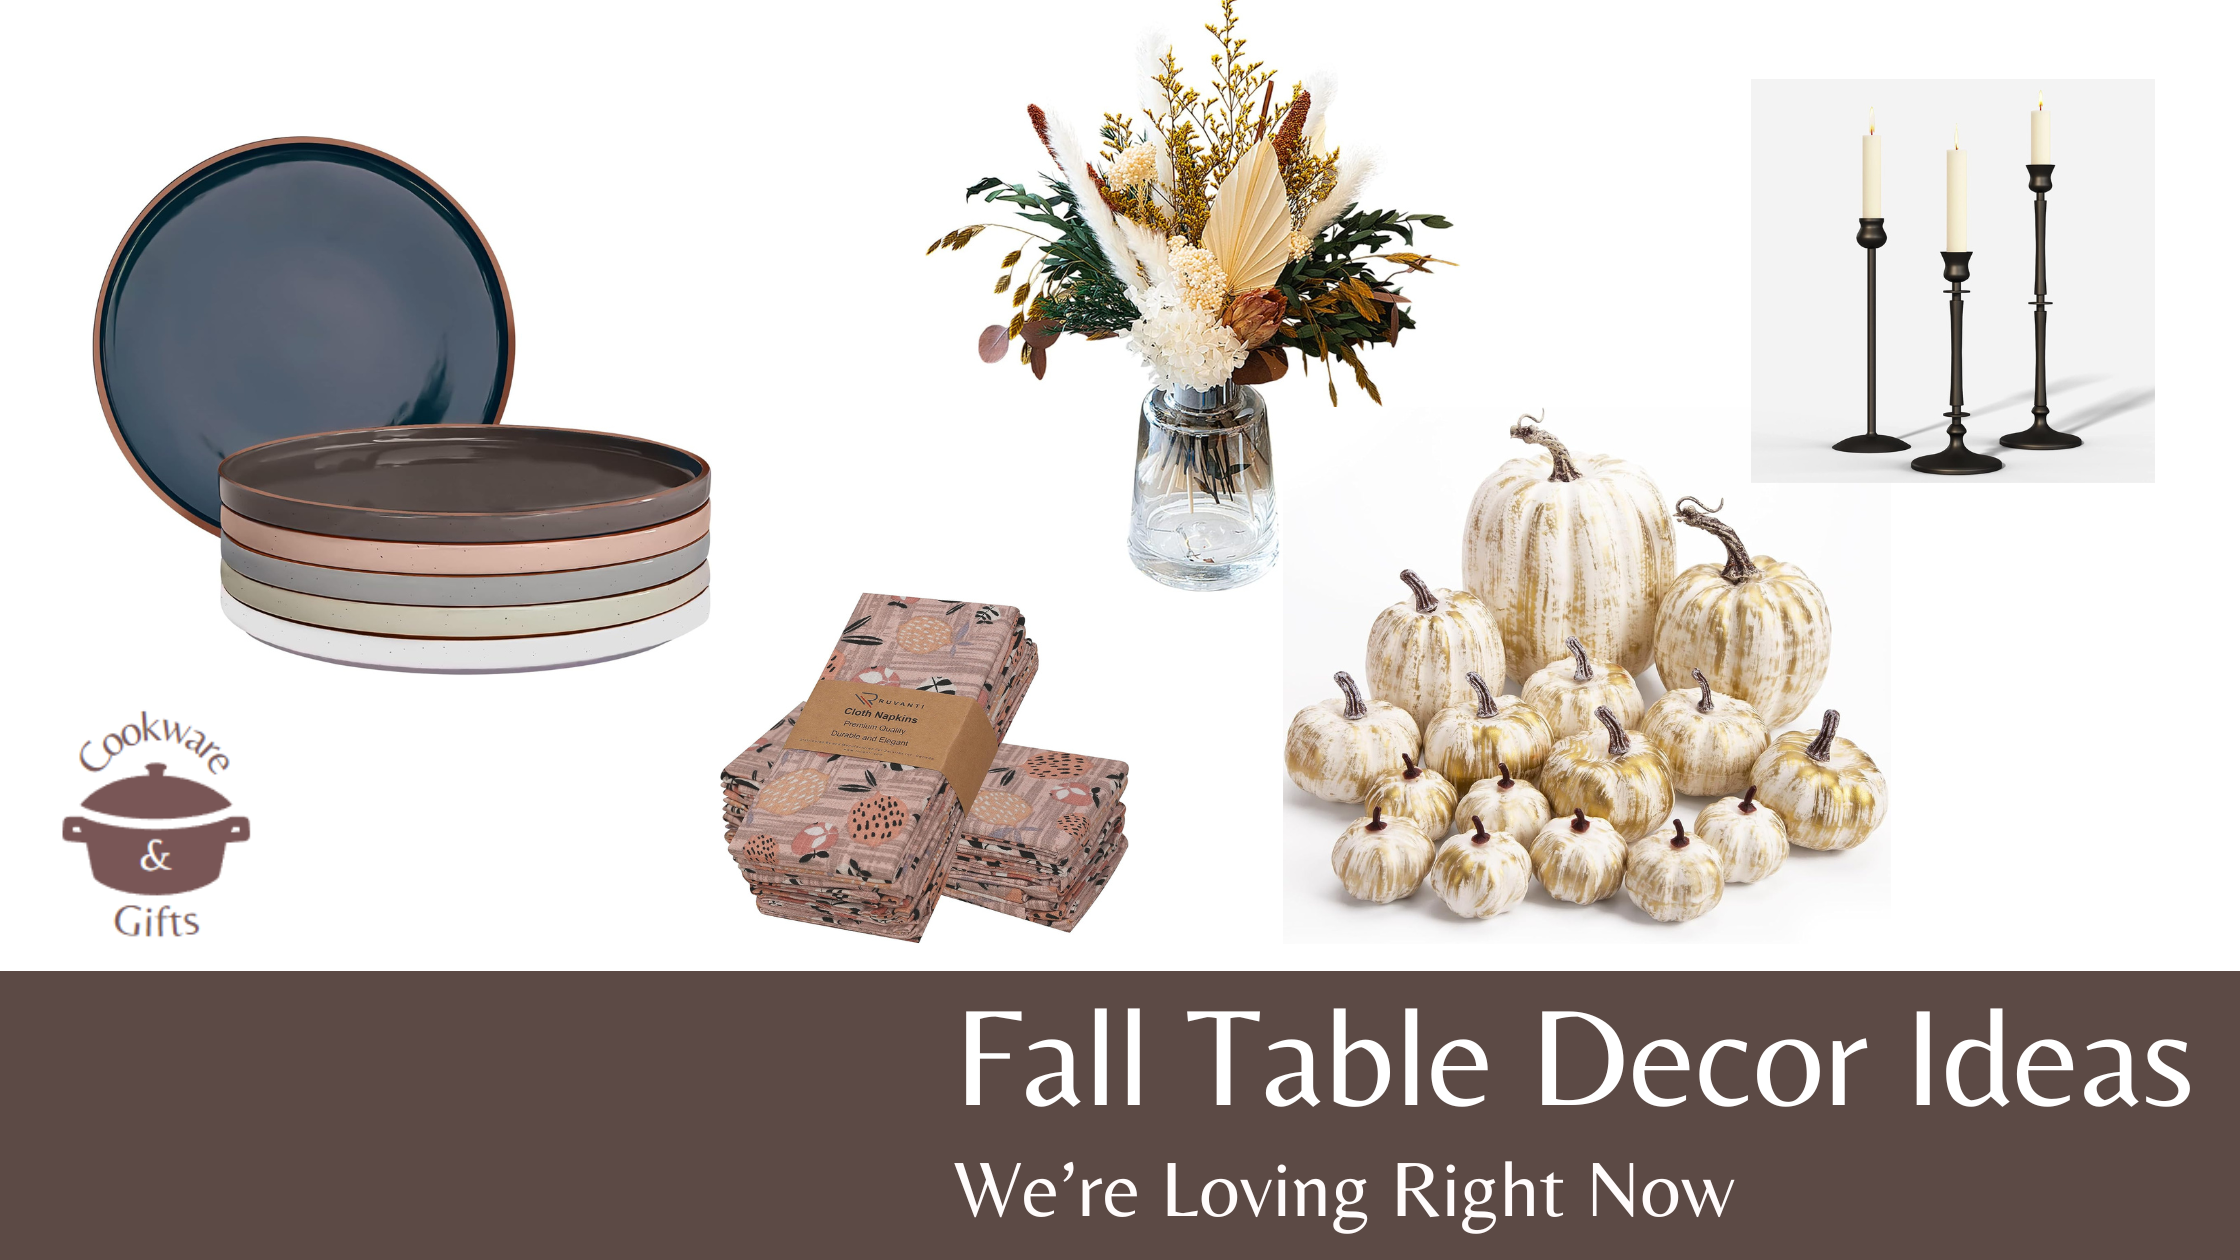 Fall Table Decor Ideas We’re Loving Right Now